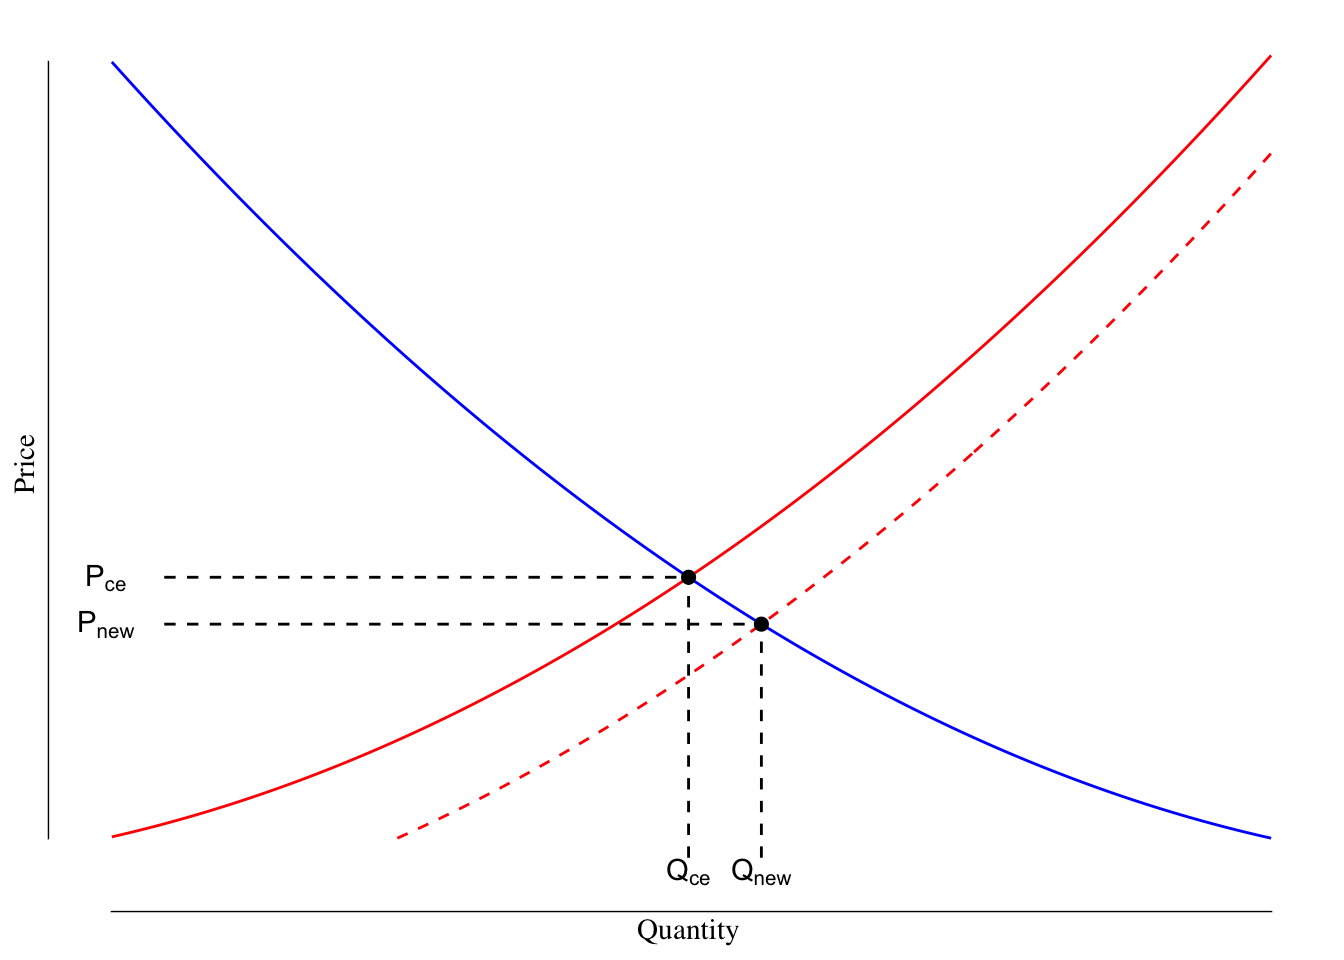 Supply and Demand Curves With Reduced Marginal Costs of Production. The orginal supply line is shown in red while the shifted supply line is shown as a dashed red line. The demand line is shown as a solid blue line.